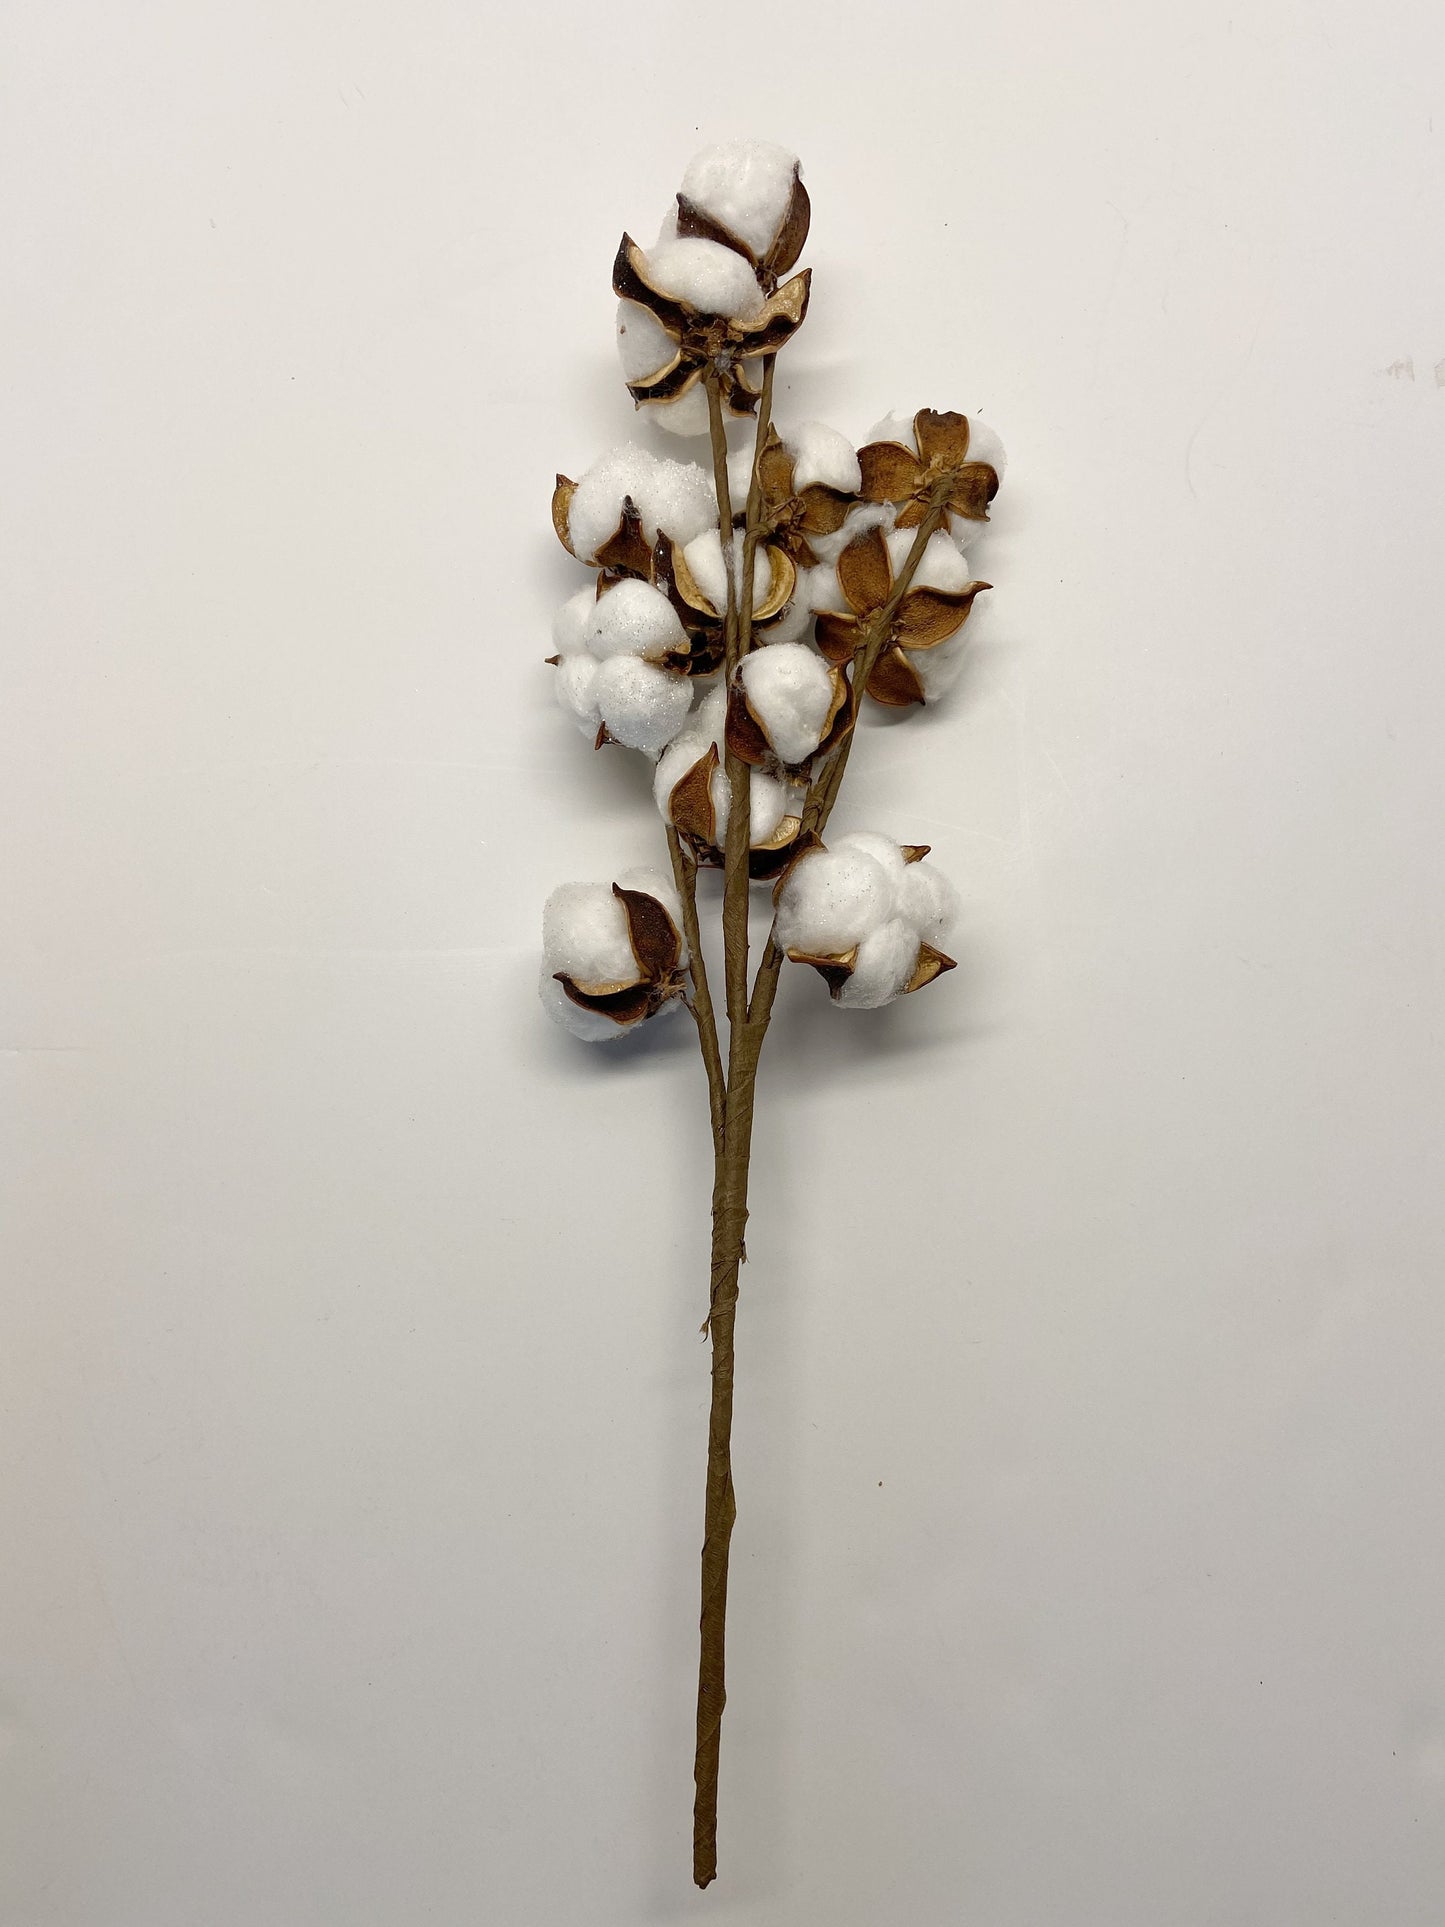 13" 18" 31" Cotton Stem, Cotton Balls, Branches, Bunch, Wedding, Rustic, Country, DIY, Flowers, Floral, Anniversary, Farmhouse, stems, white